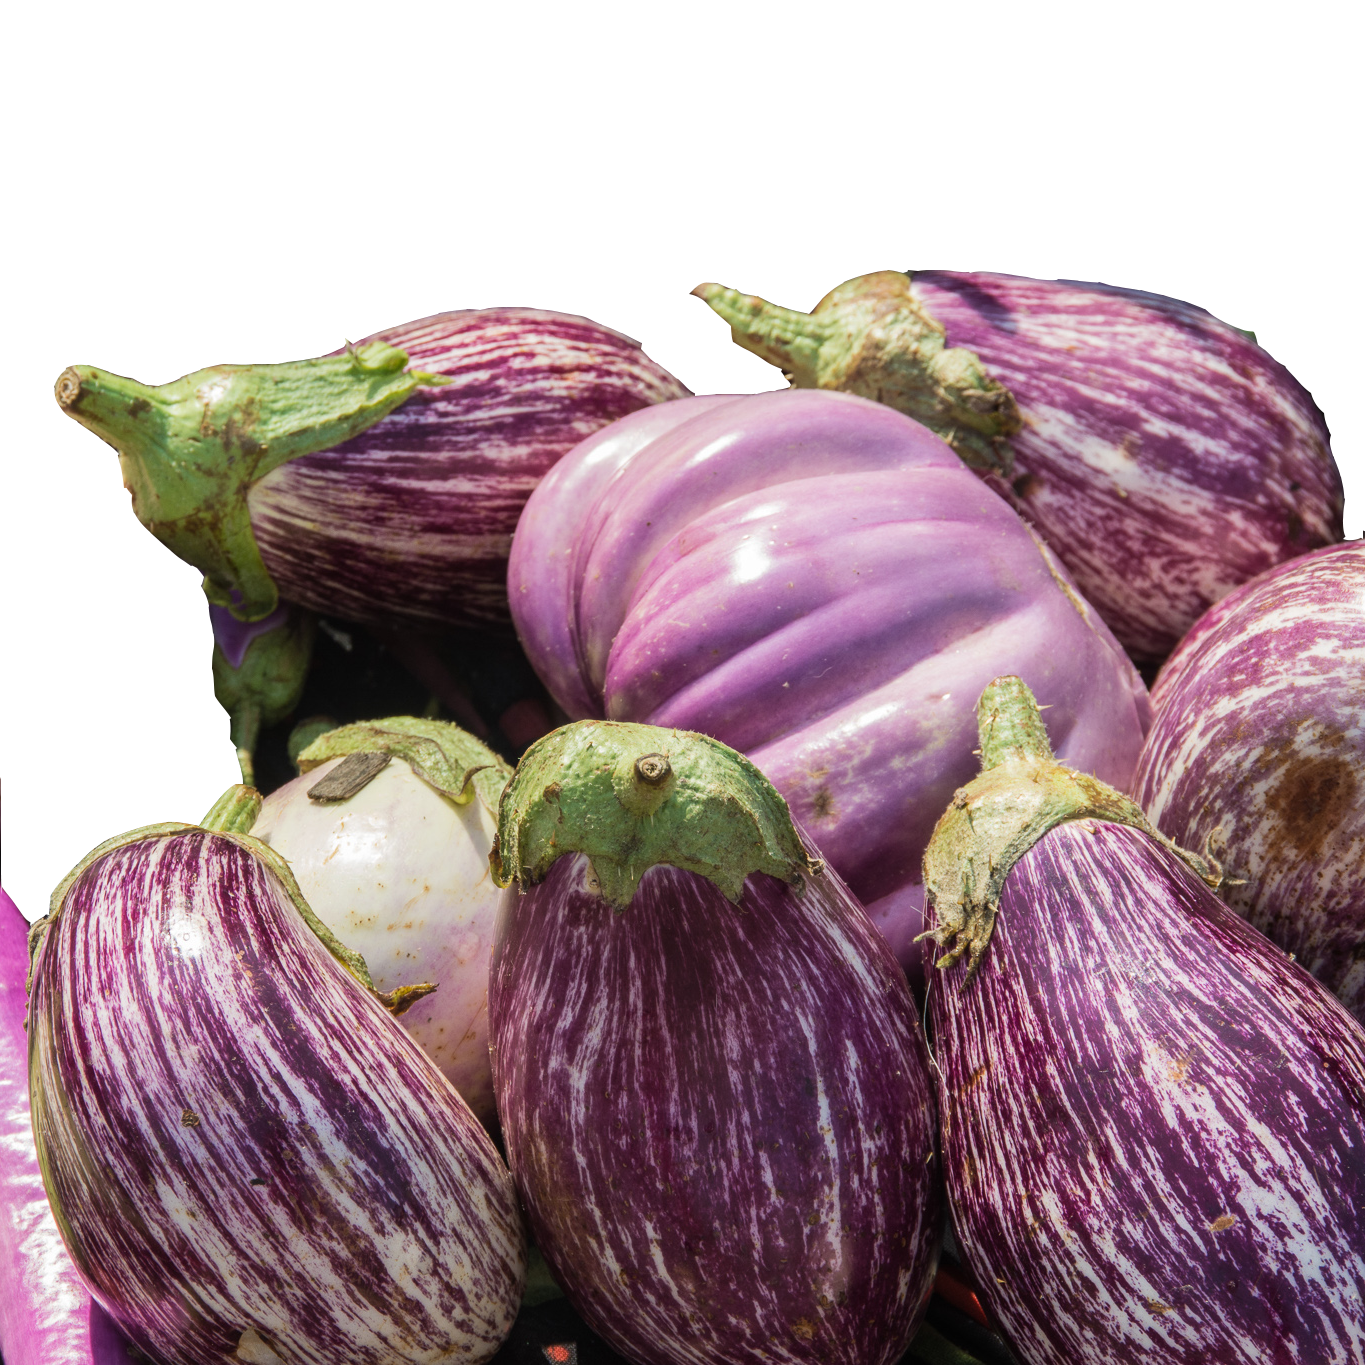 Eggplants of different varieties sit in a pile.